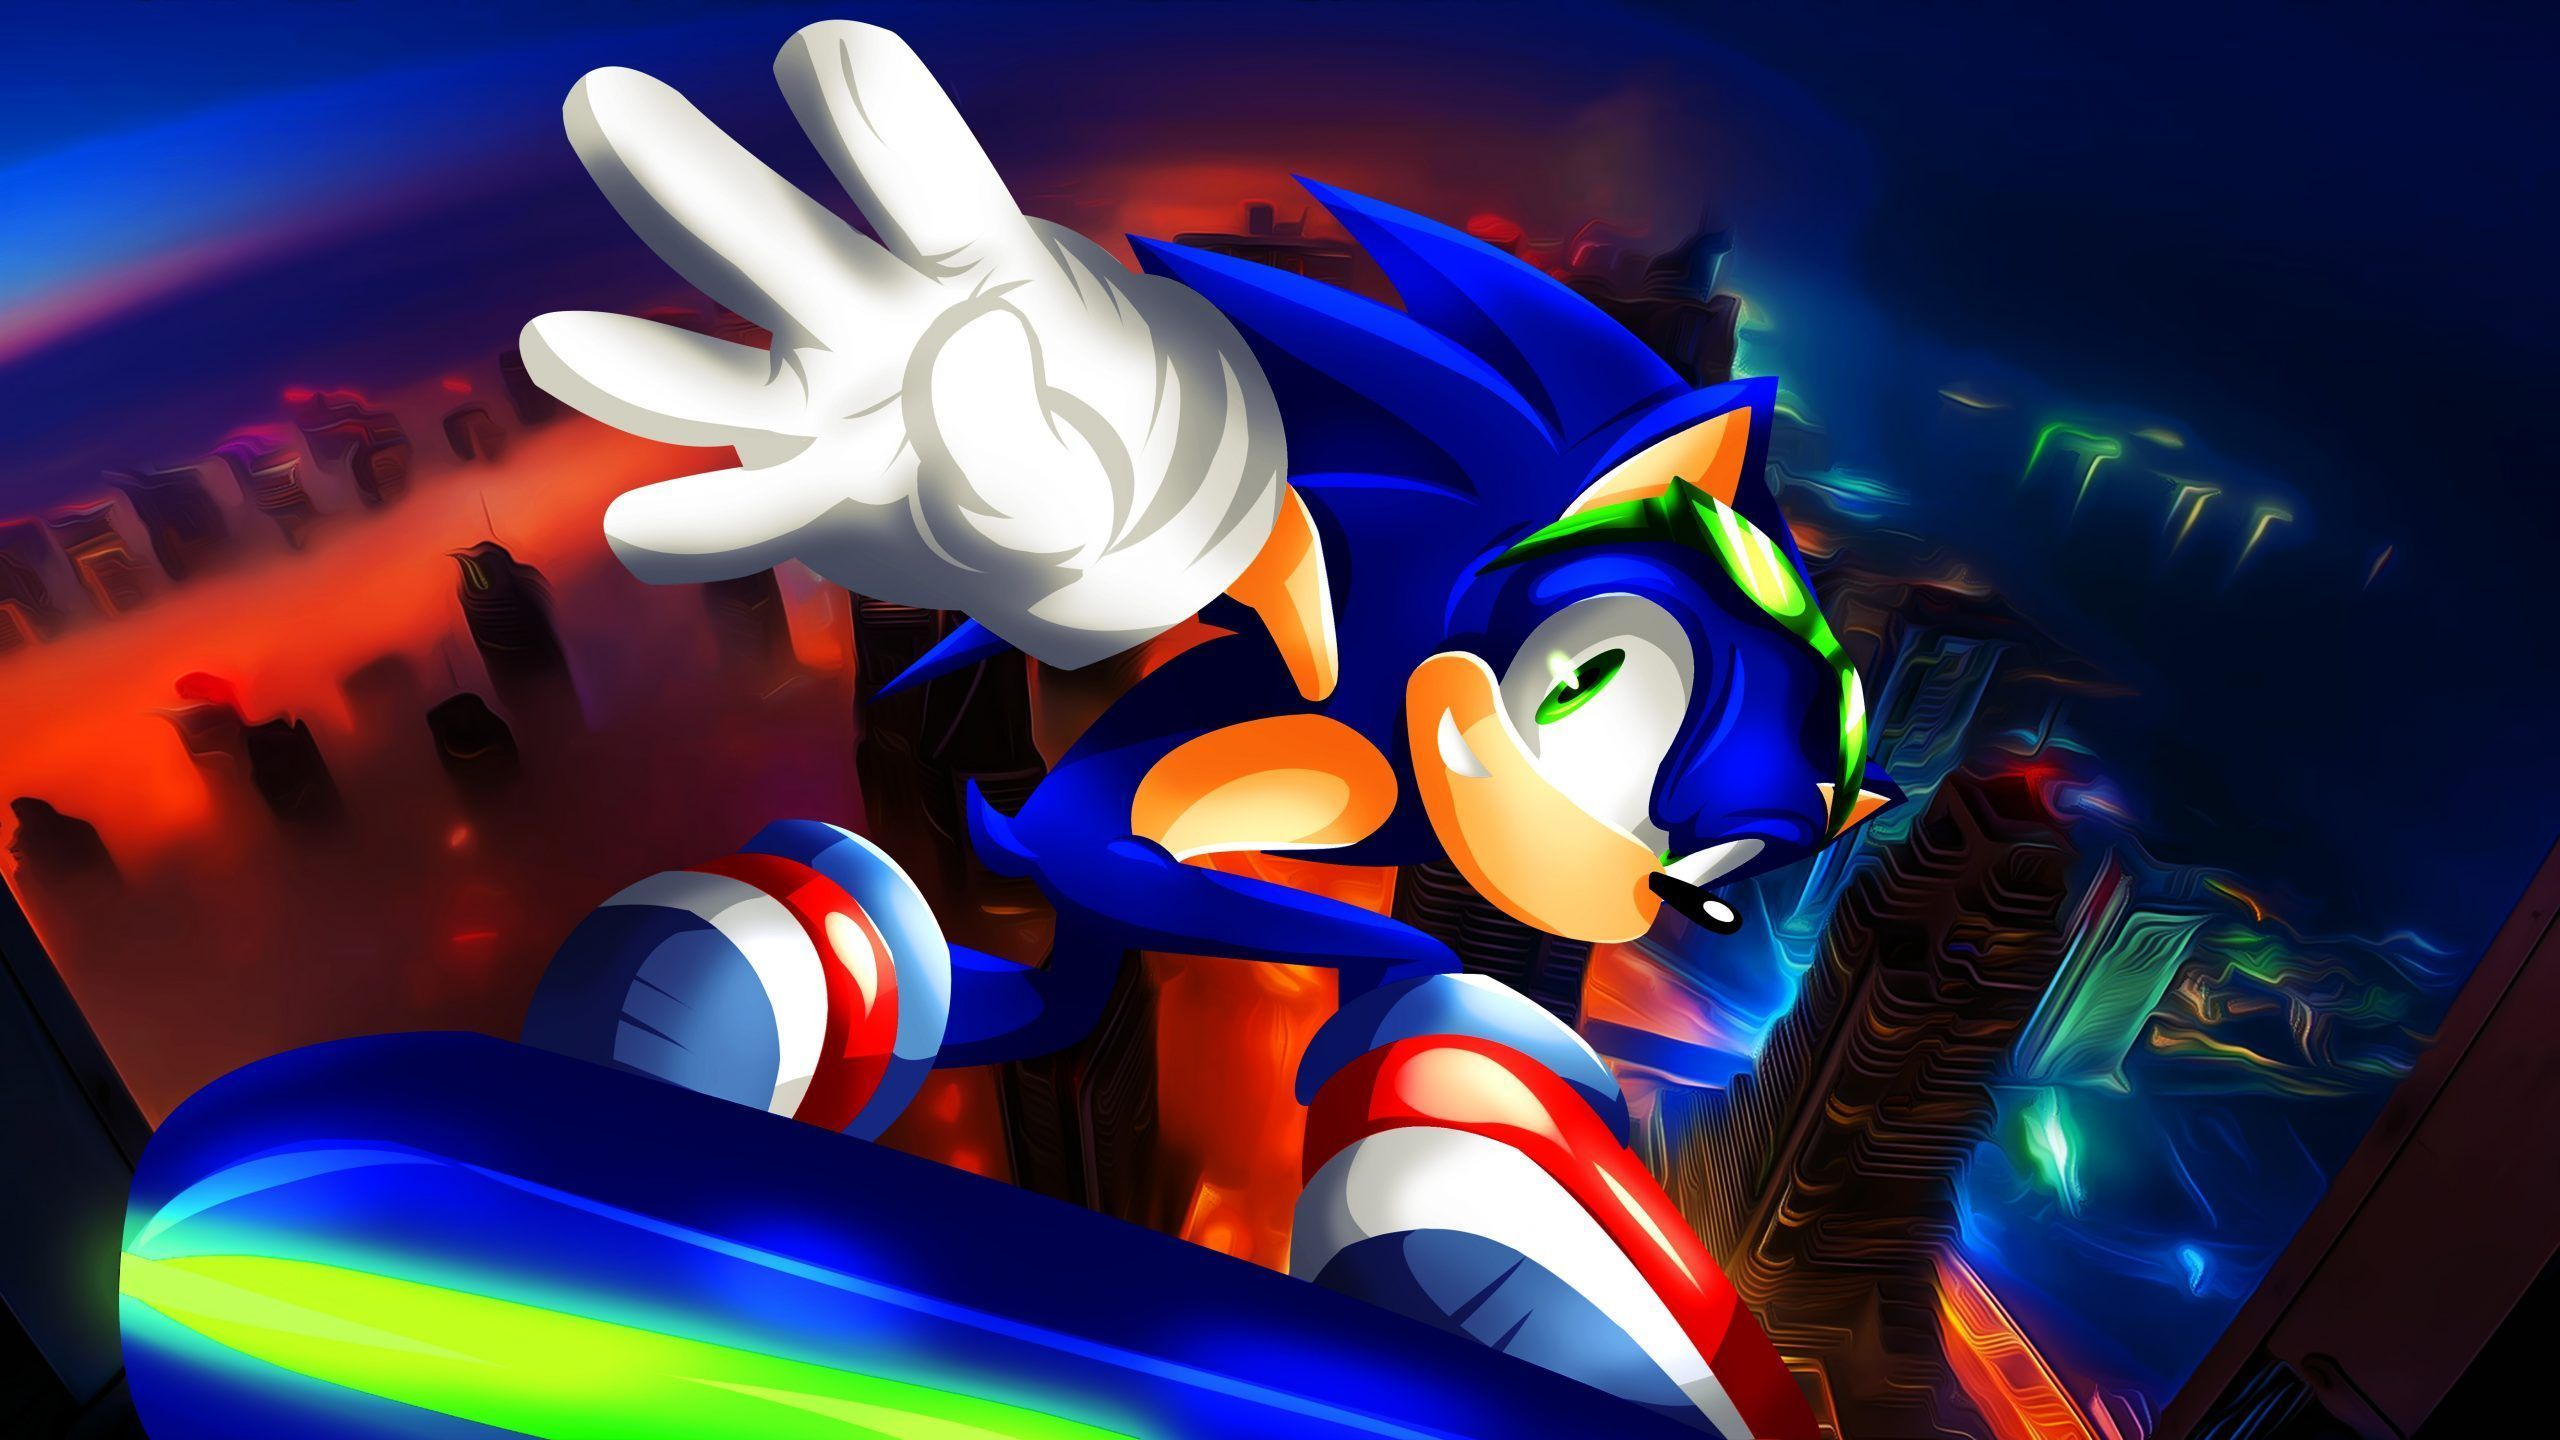 2560x1440 Desktop Sonic Wallpaper Discover more Animations, Blue, Character, Game Series, Sonic wallpaper. ;&#128;&brvbar; in 2022 | Sonic, Art invitation, Sonic and amy